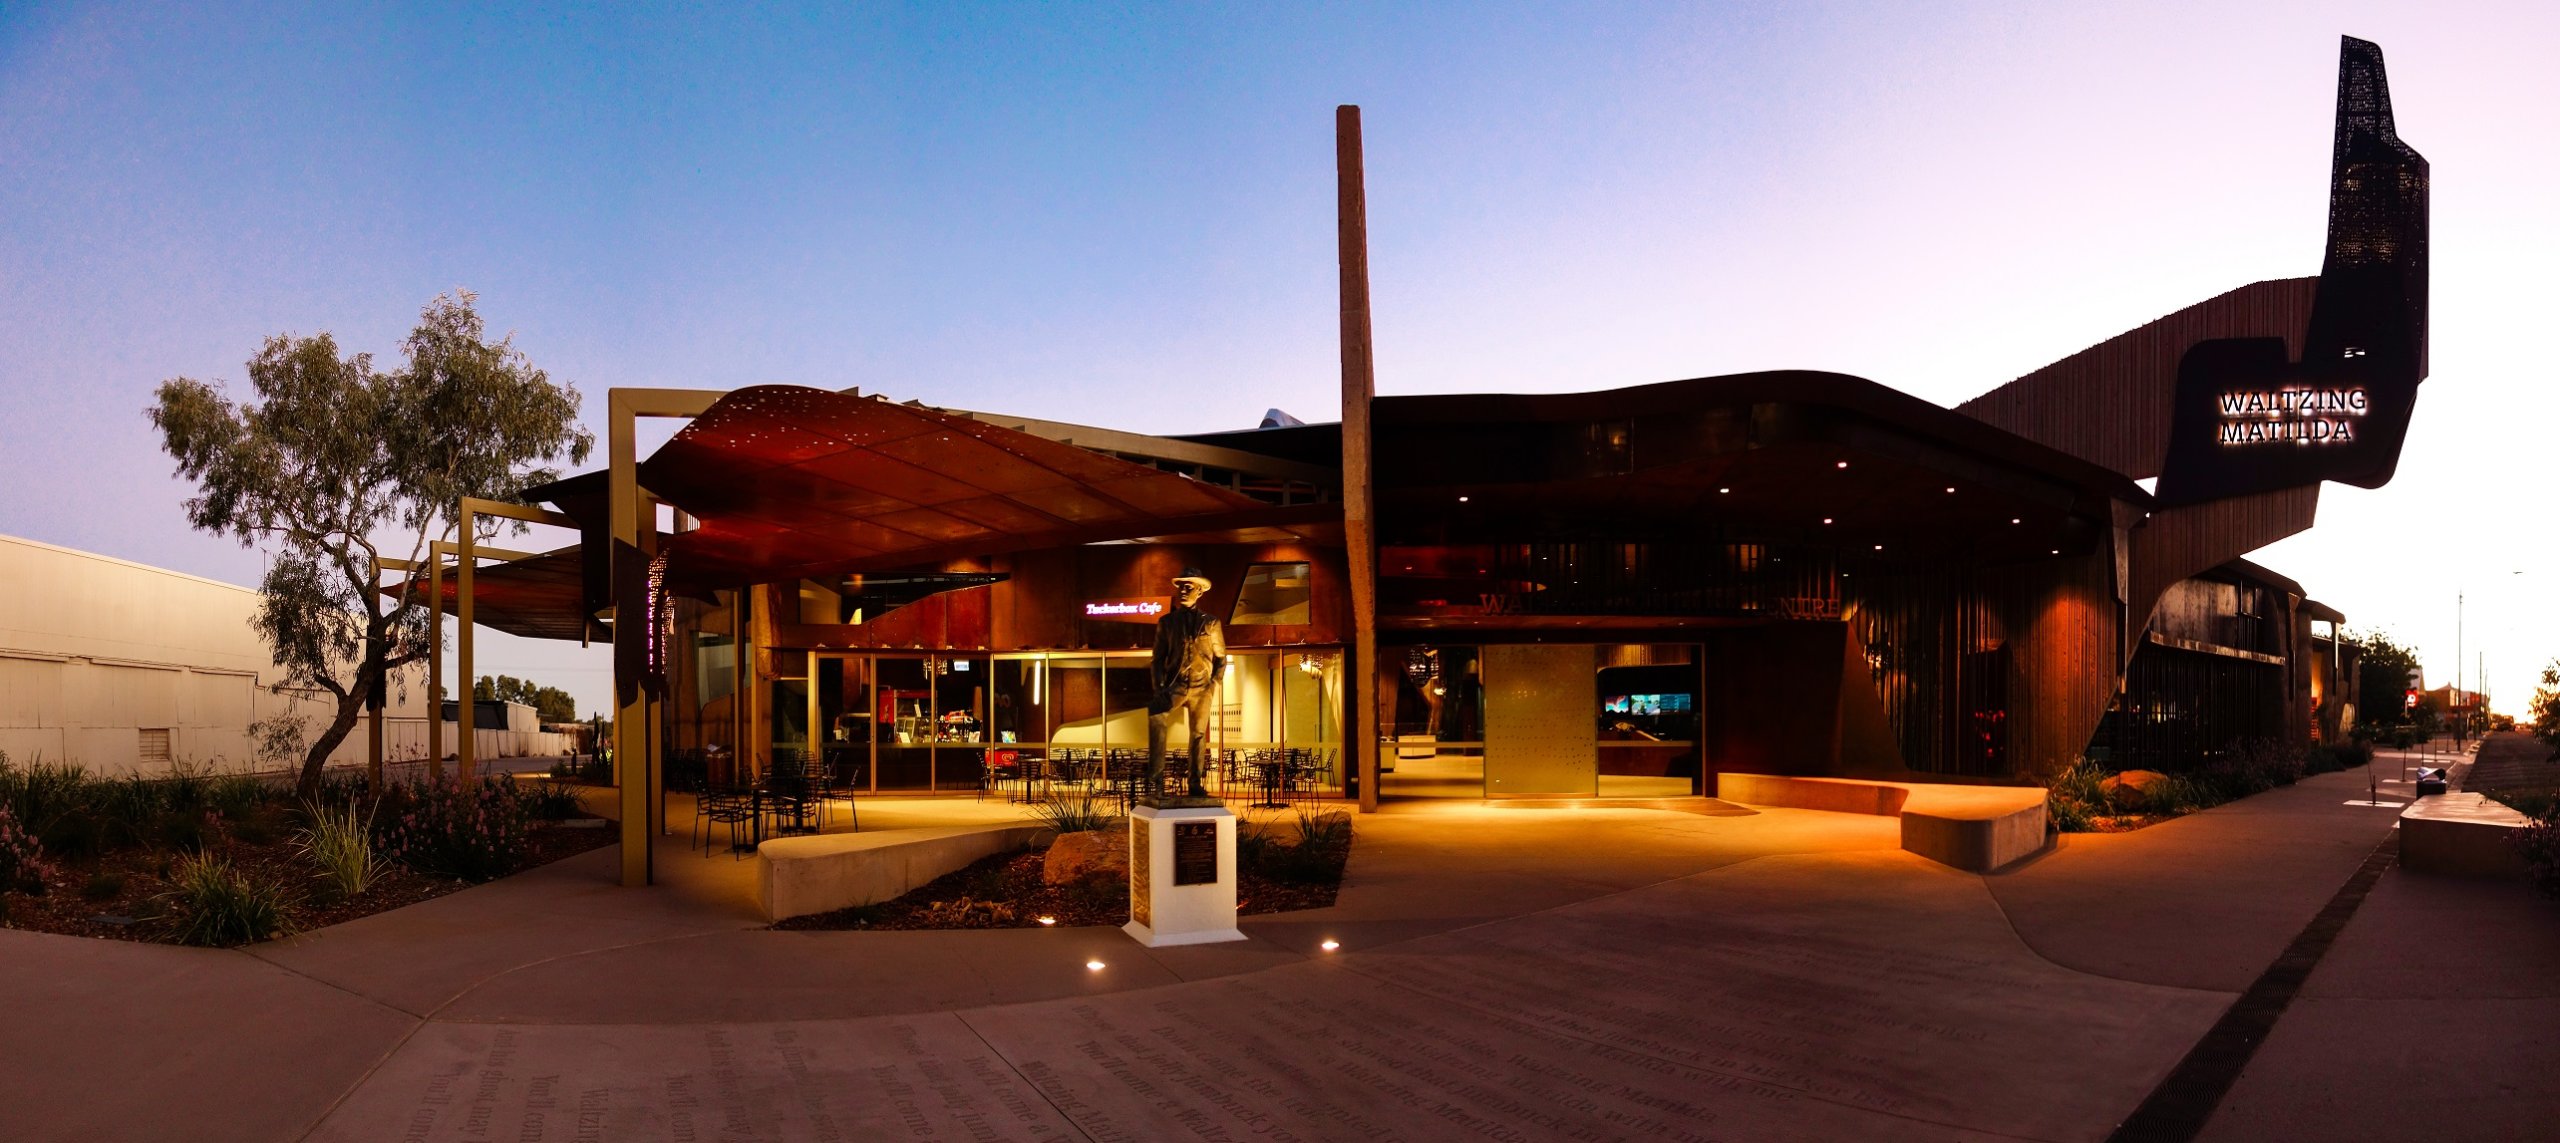 An outside view of Waltzing Matilda Centre